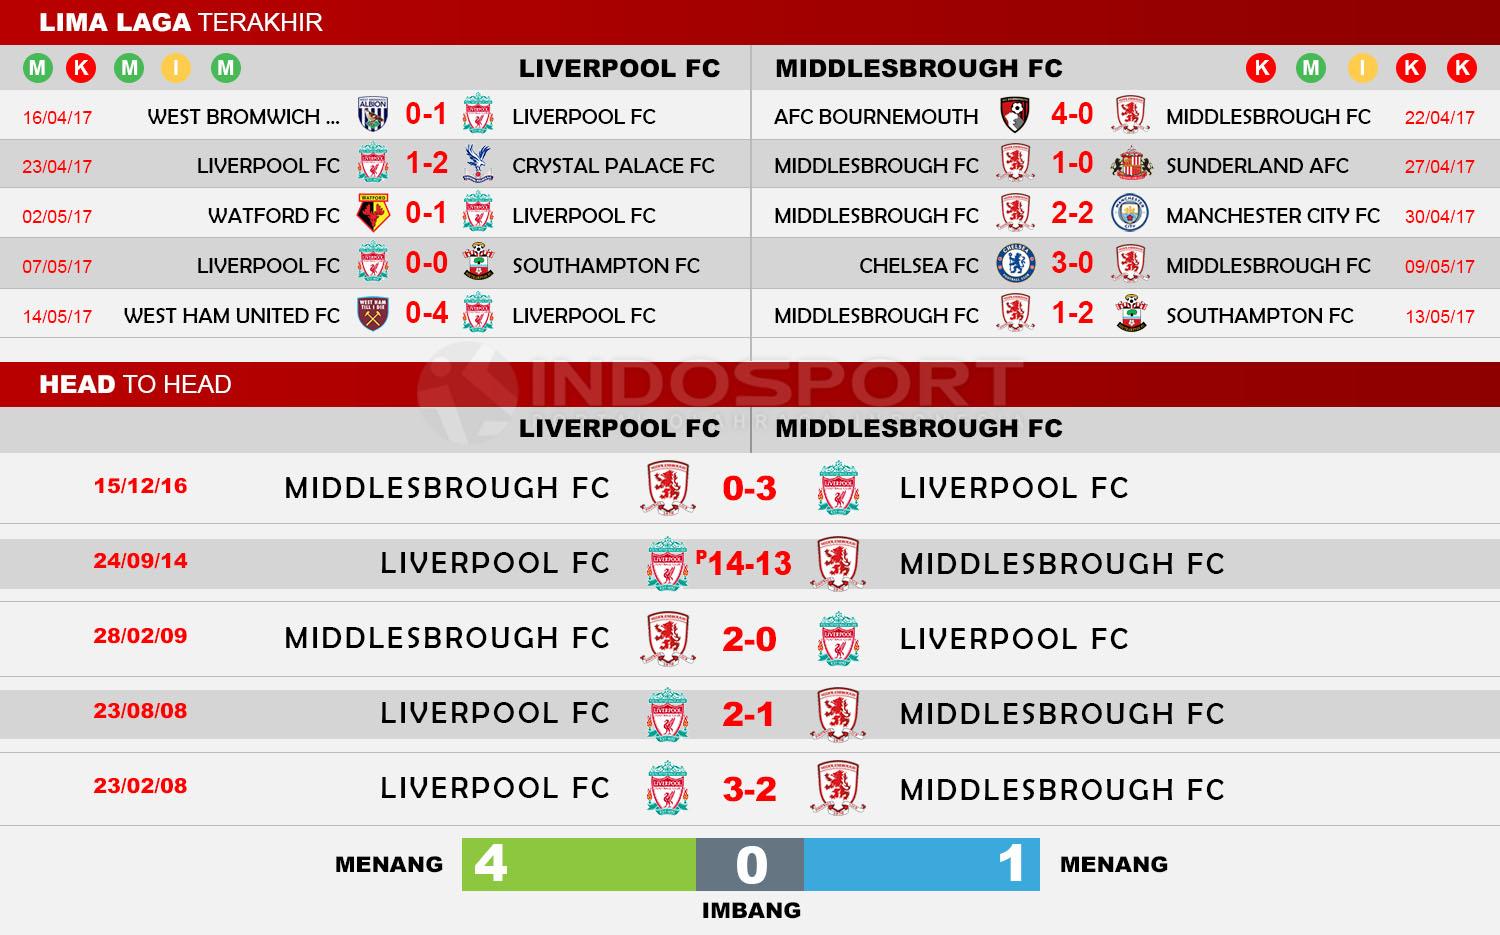 Head to Head Liverpool vs Middlesbrough Copyright: Indosport/Soccerway